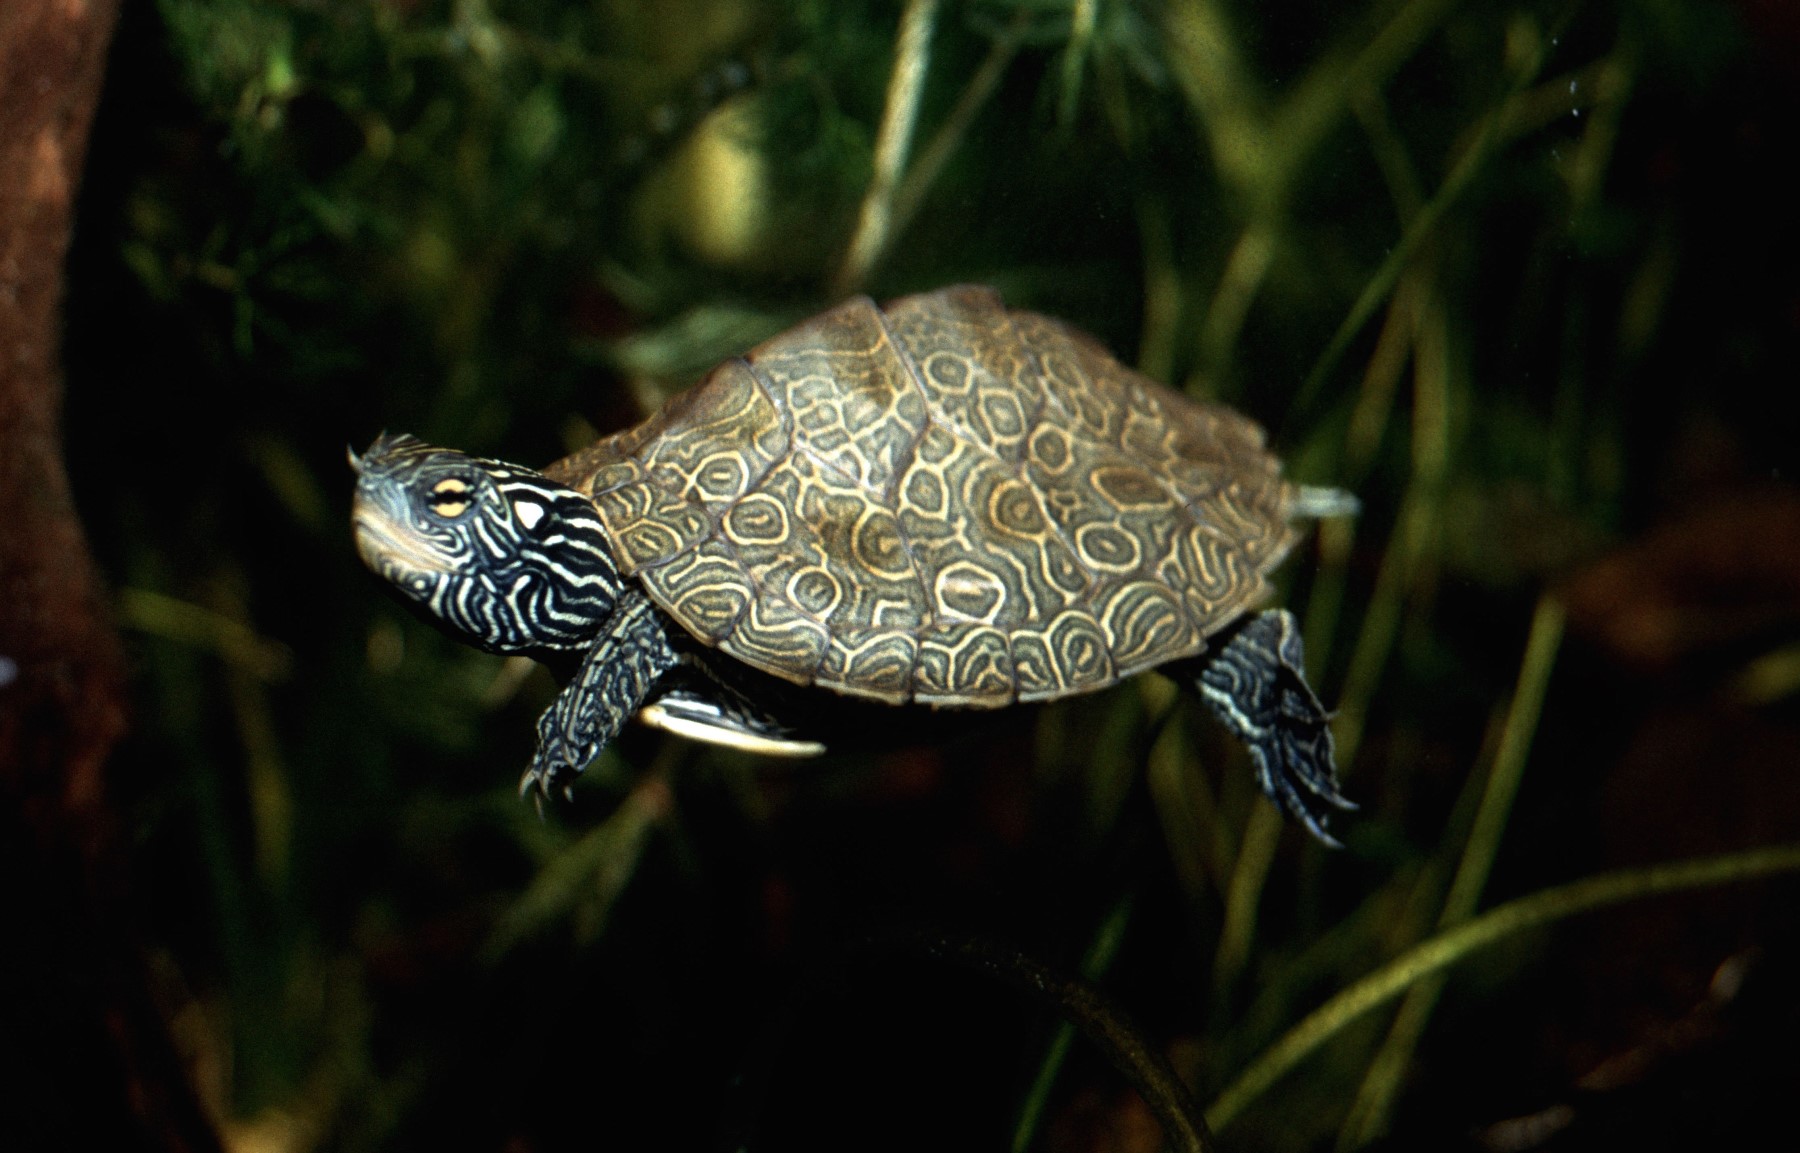 A small turtle with a patterned shell and body swimming in front of reeds